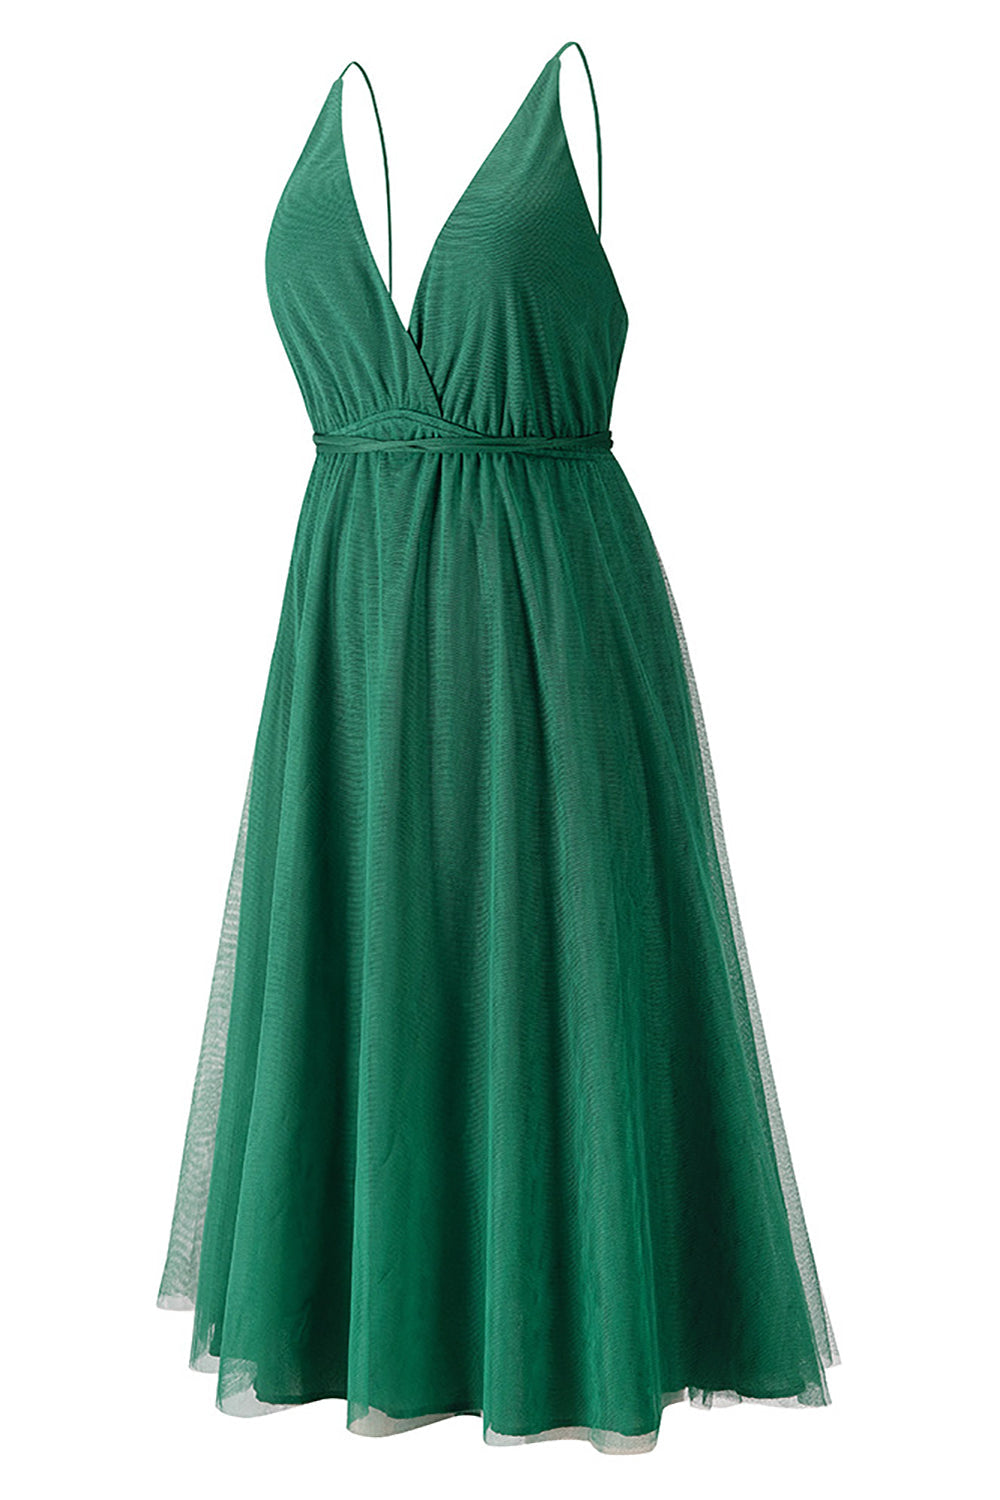 Simple Deep V Neck Green Party Dress